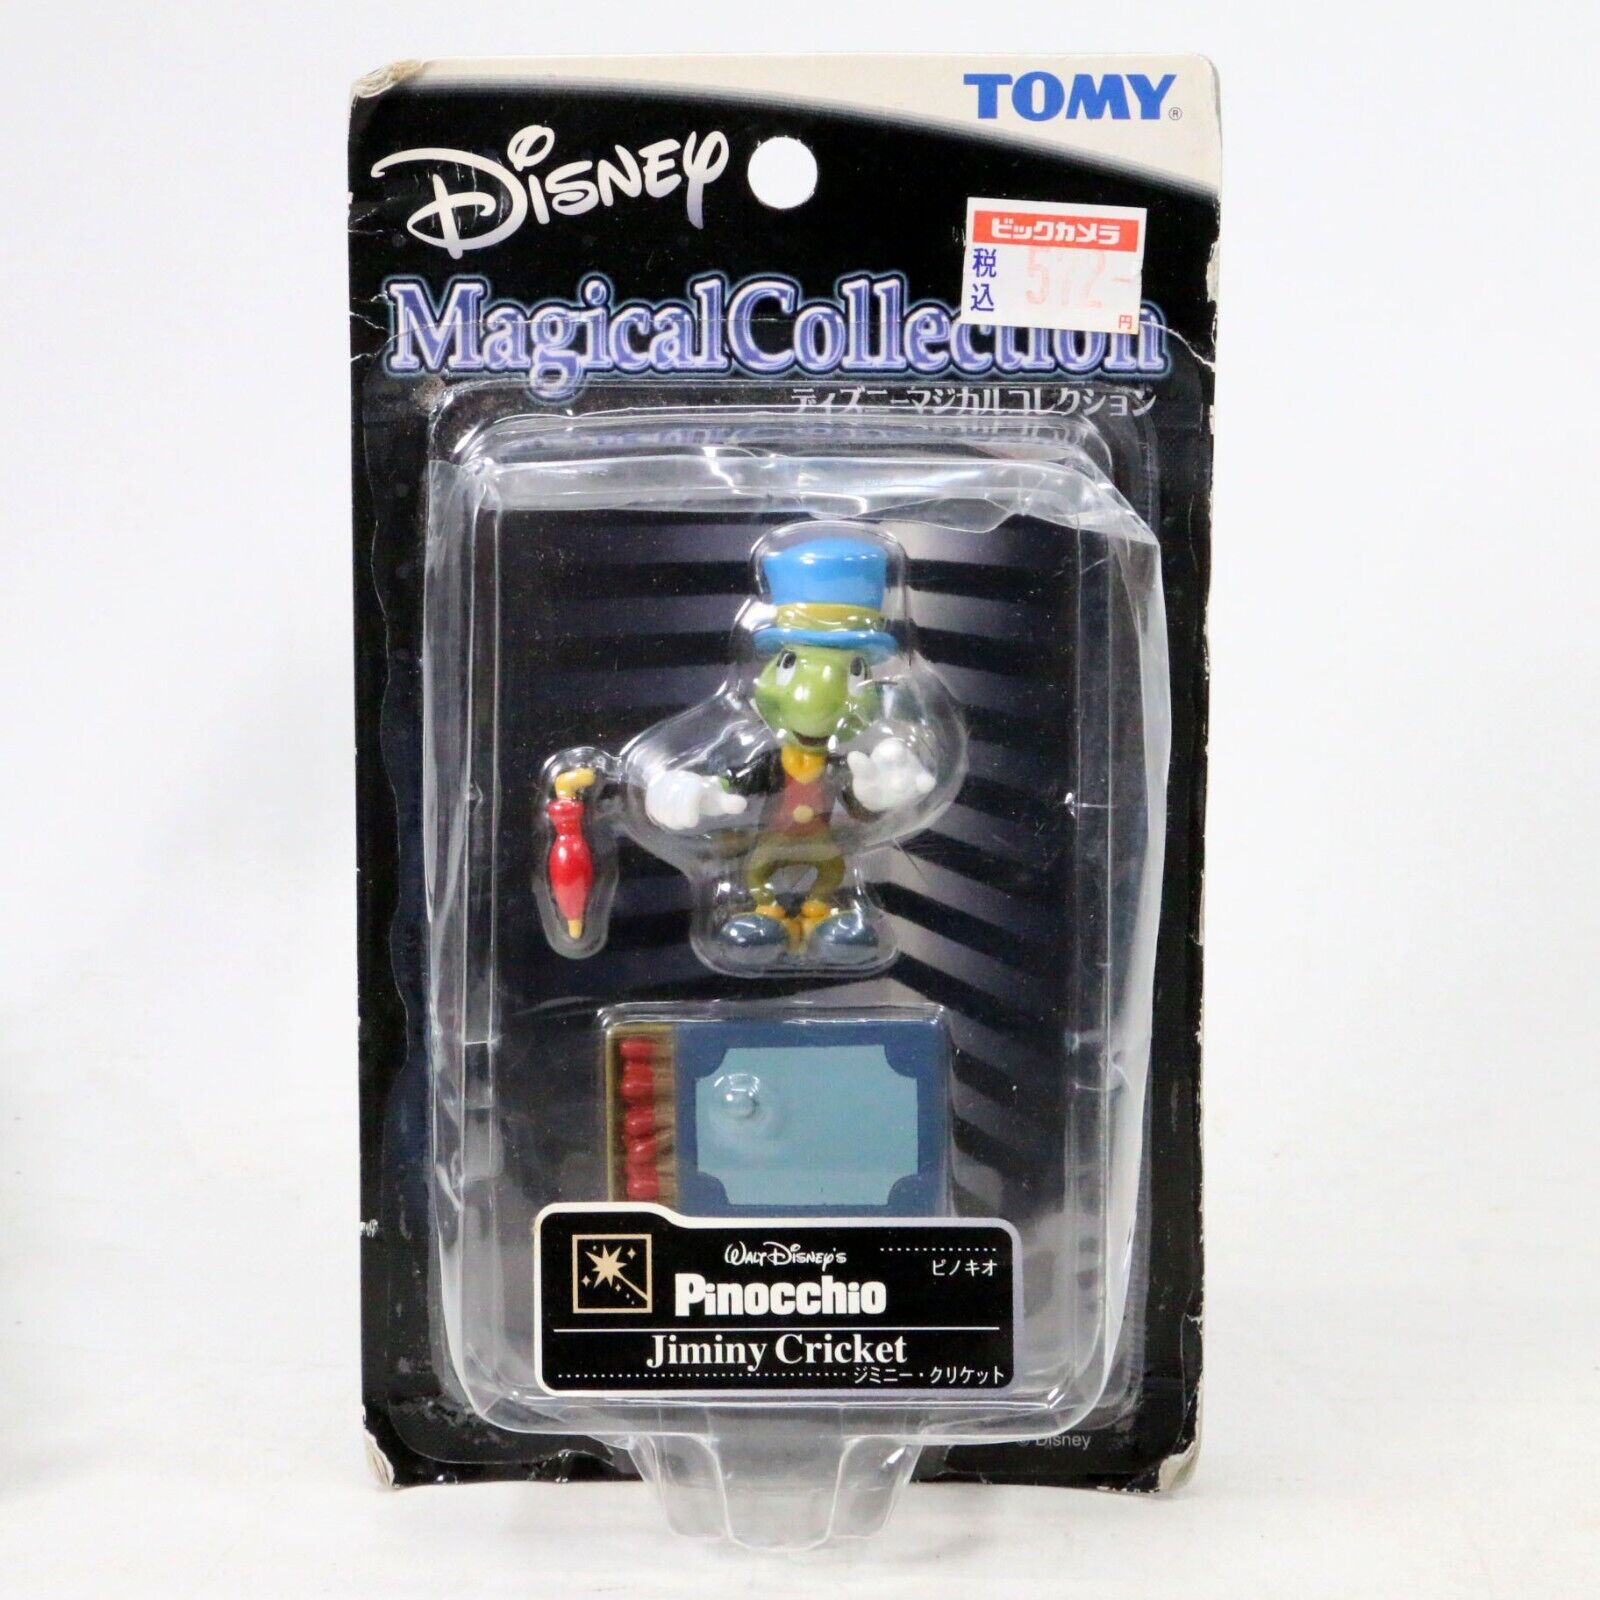 Tomy Disney Magical Collection Jiminy Cricket #087 (Pinocchio) - Very Rare - US